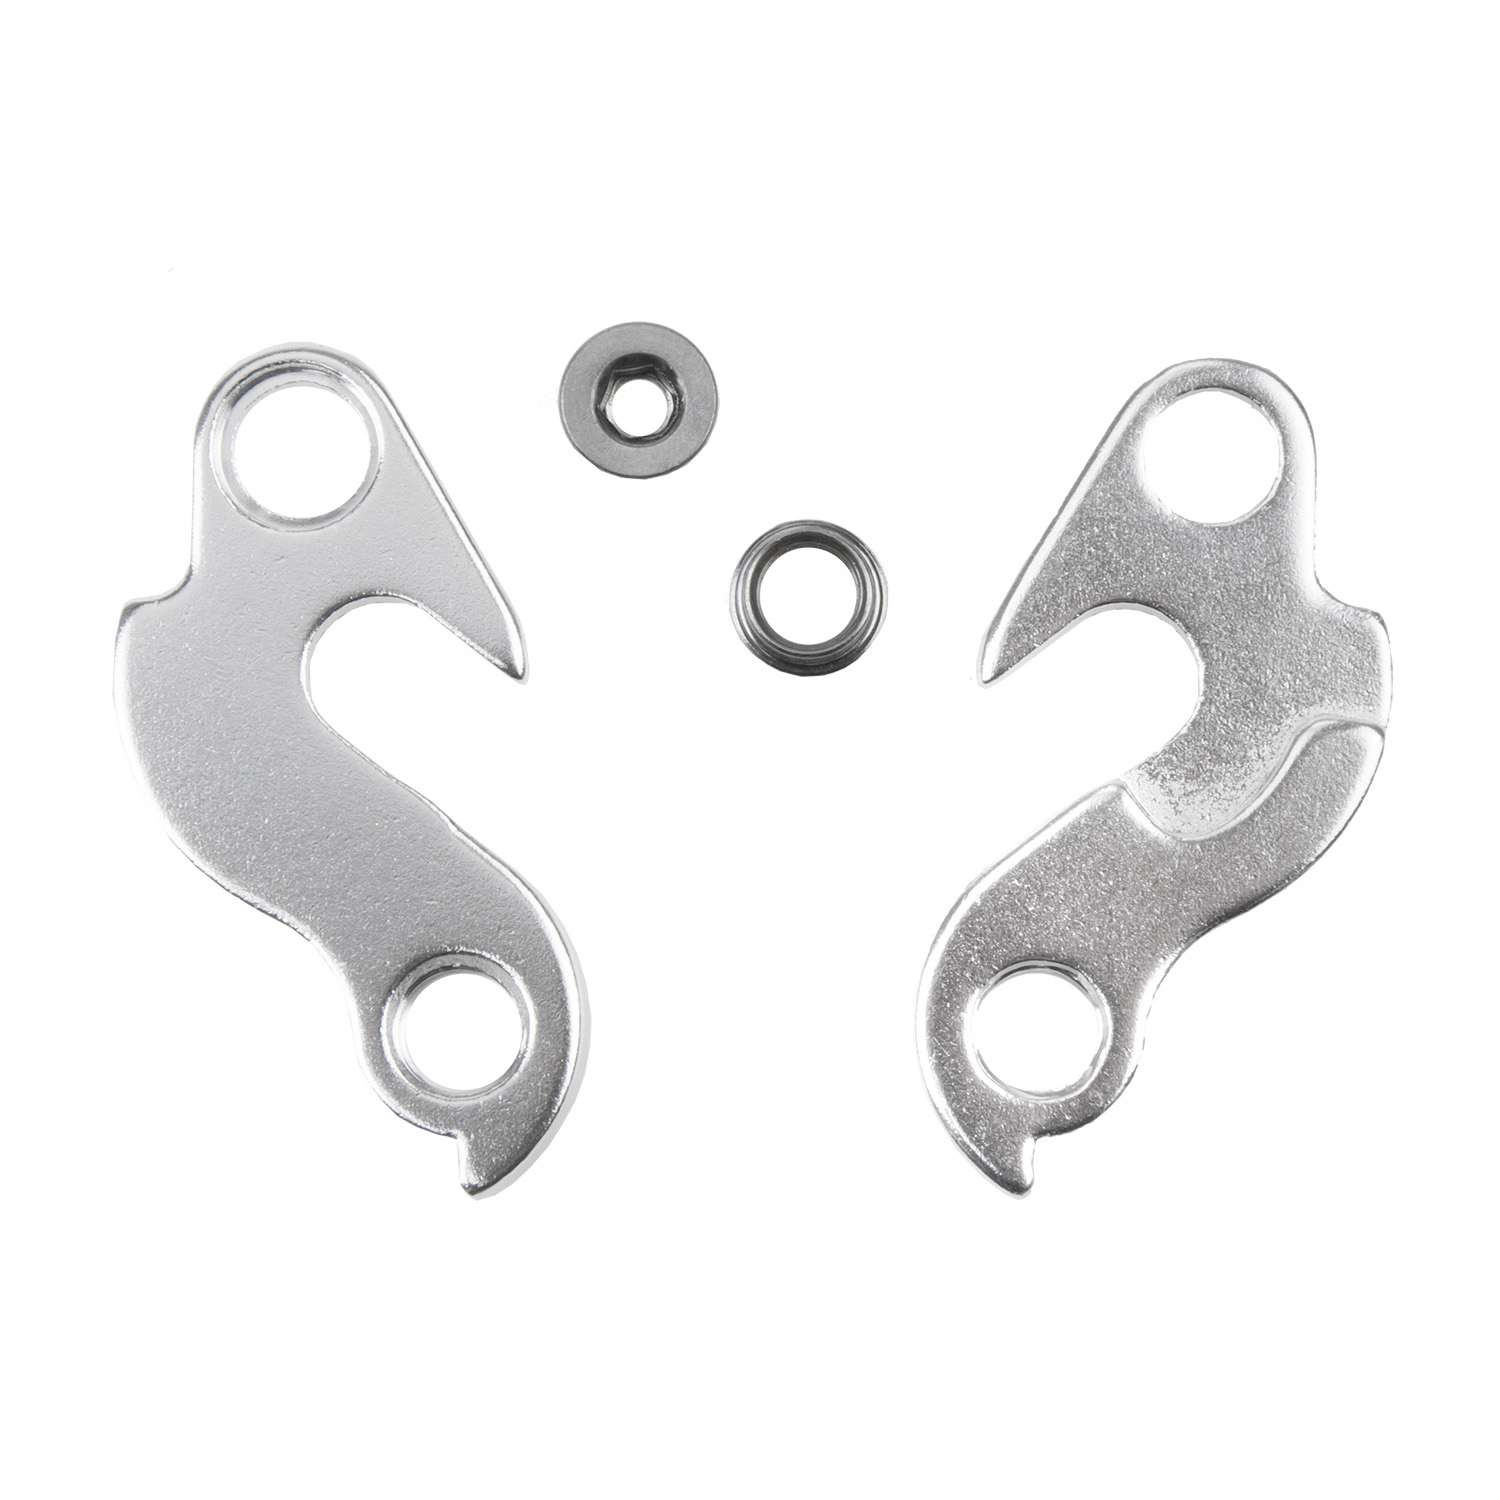 660798 S4 derailleur hanger  – AVAILABLE IN SELECTED BIKE SHOPS